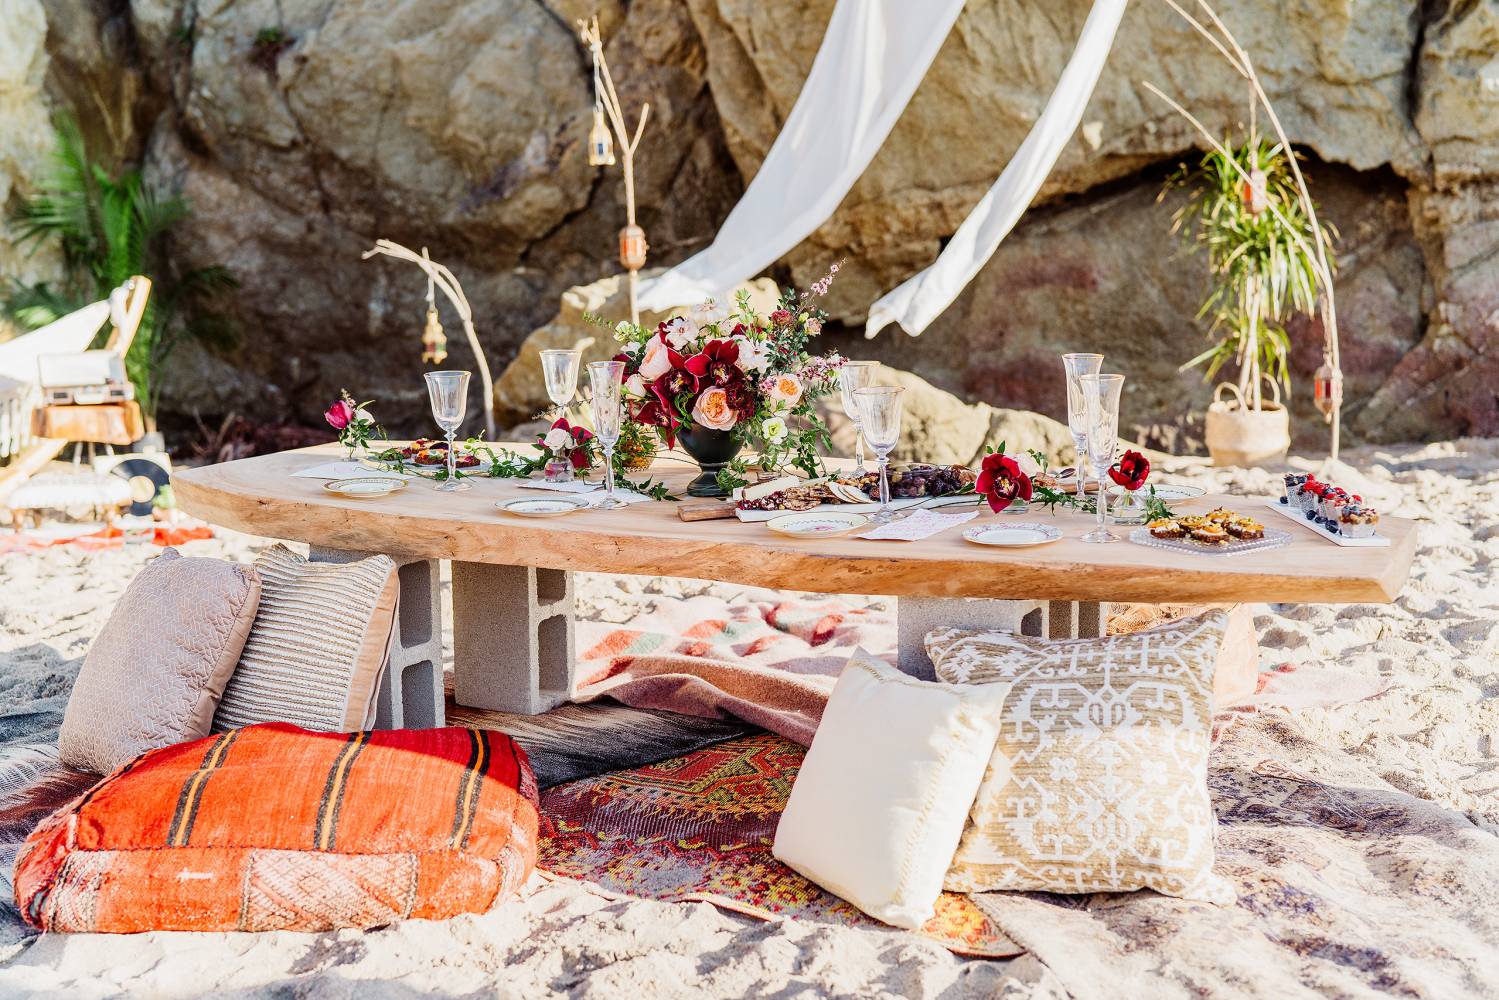 The Most Pinterest Galentine's Day Picnic Ever